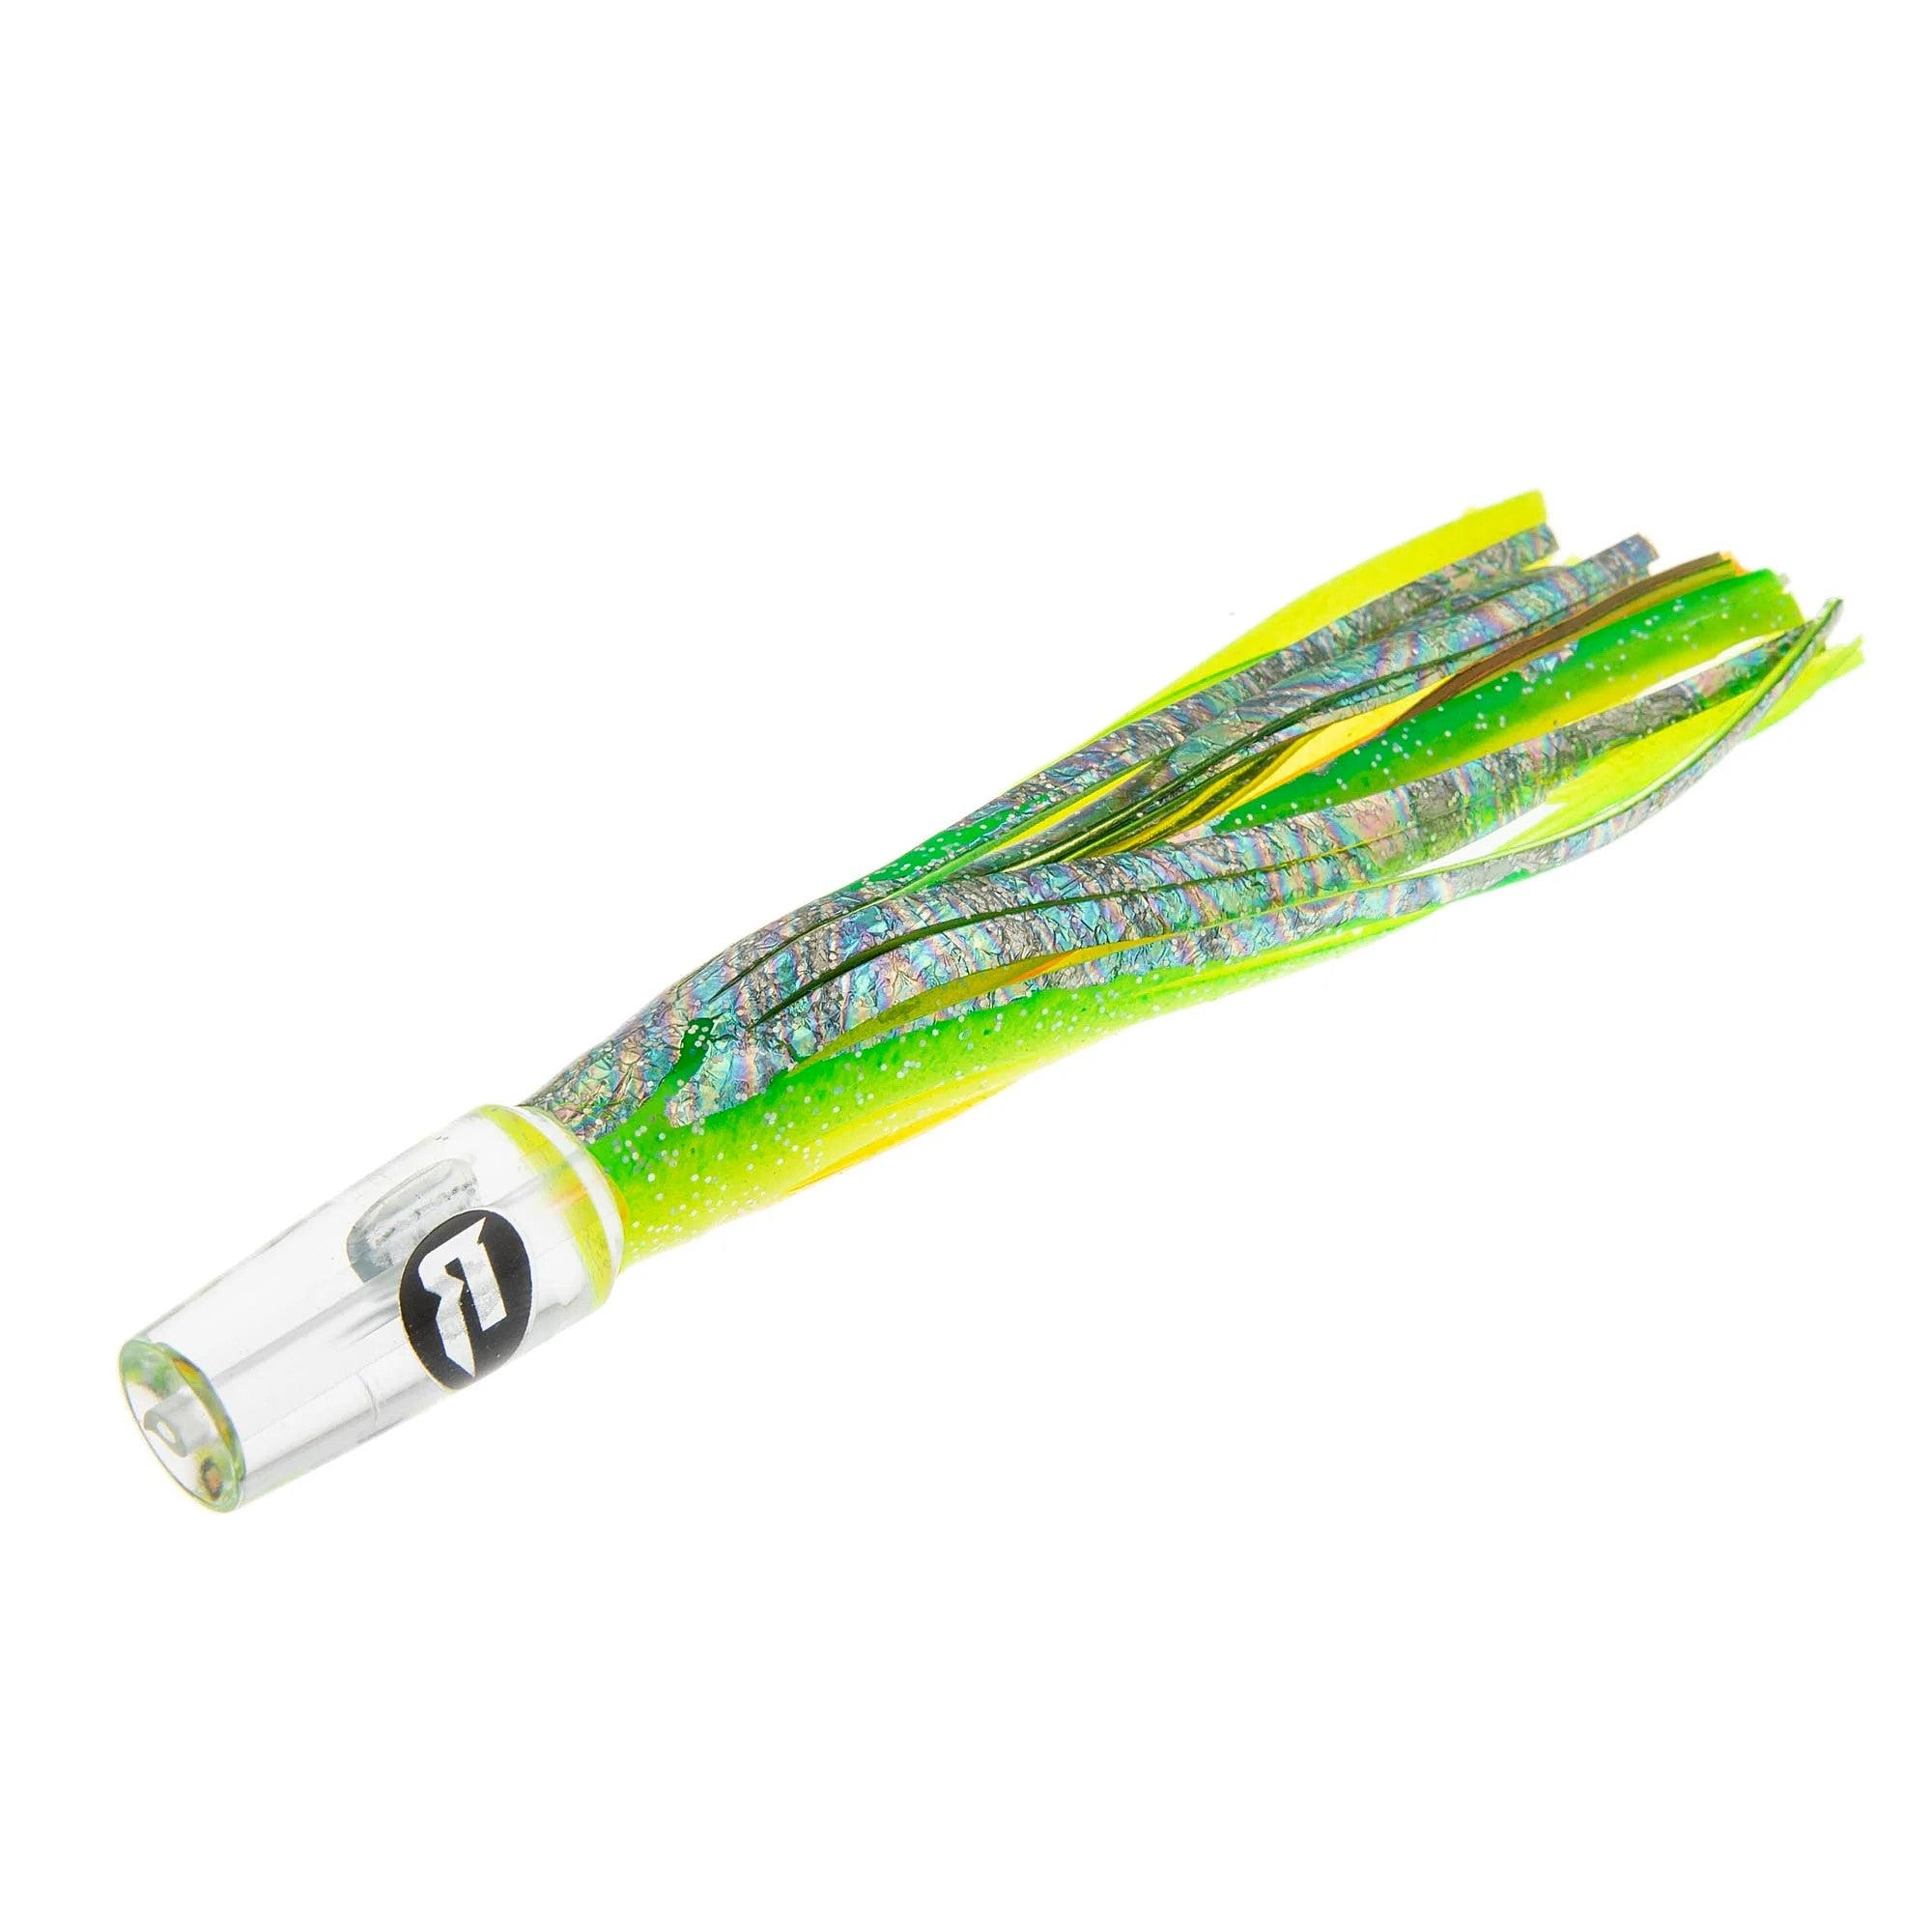 Richter Hockzhead Rigged Mono Chartreuse